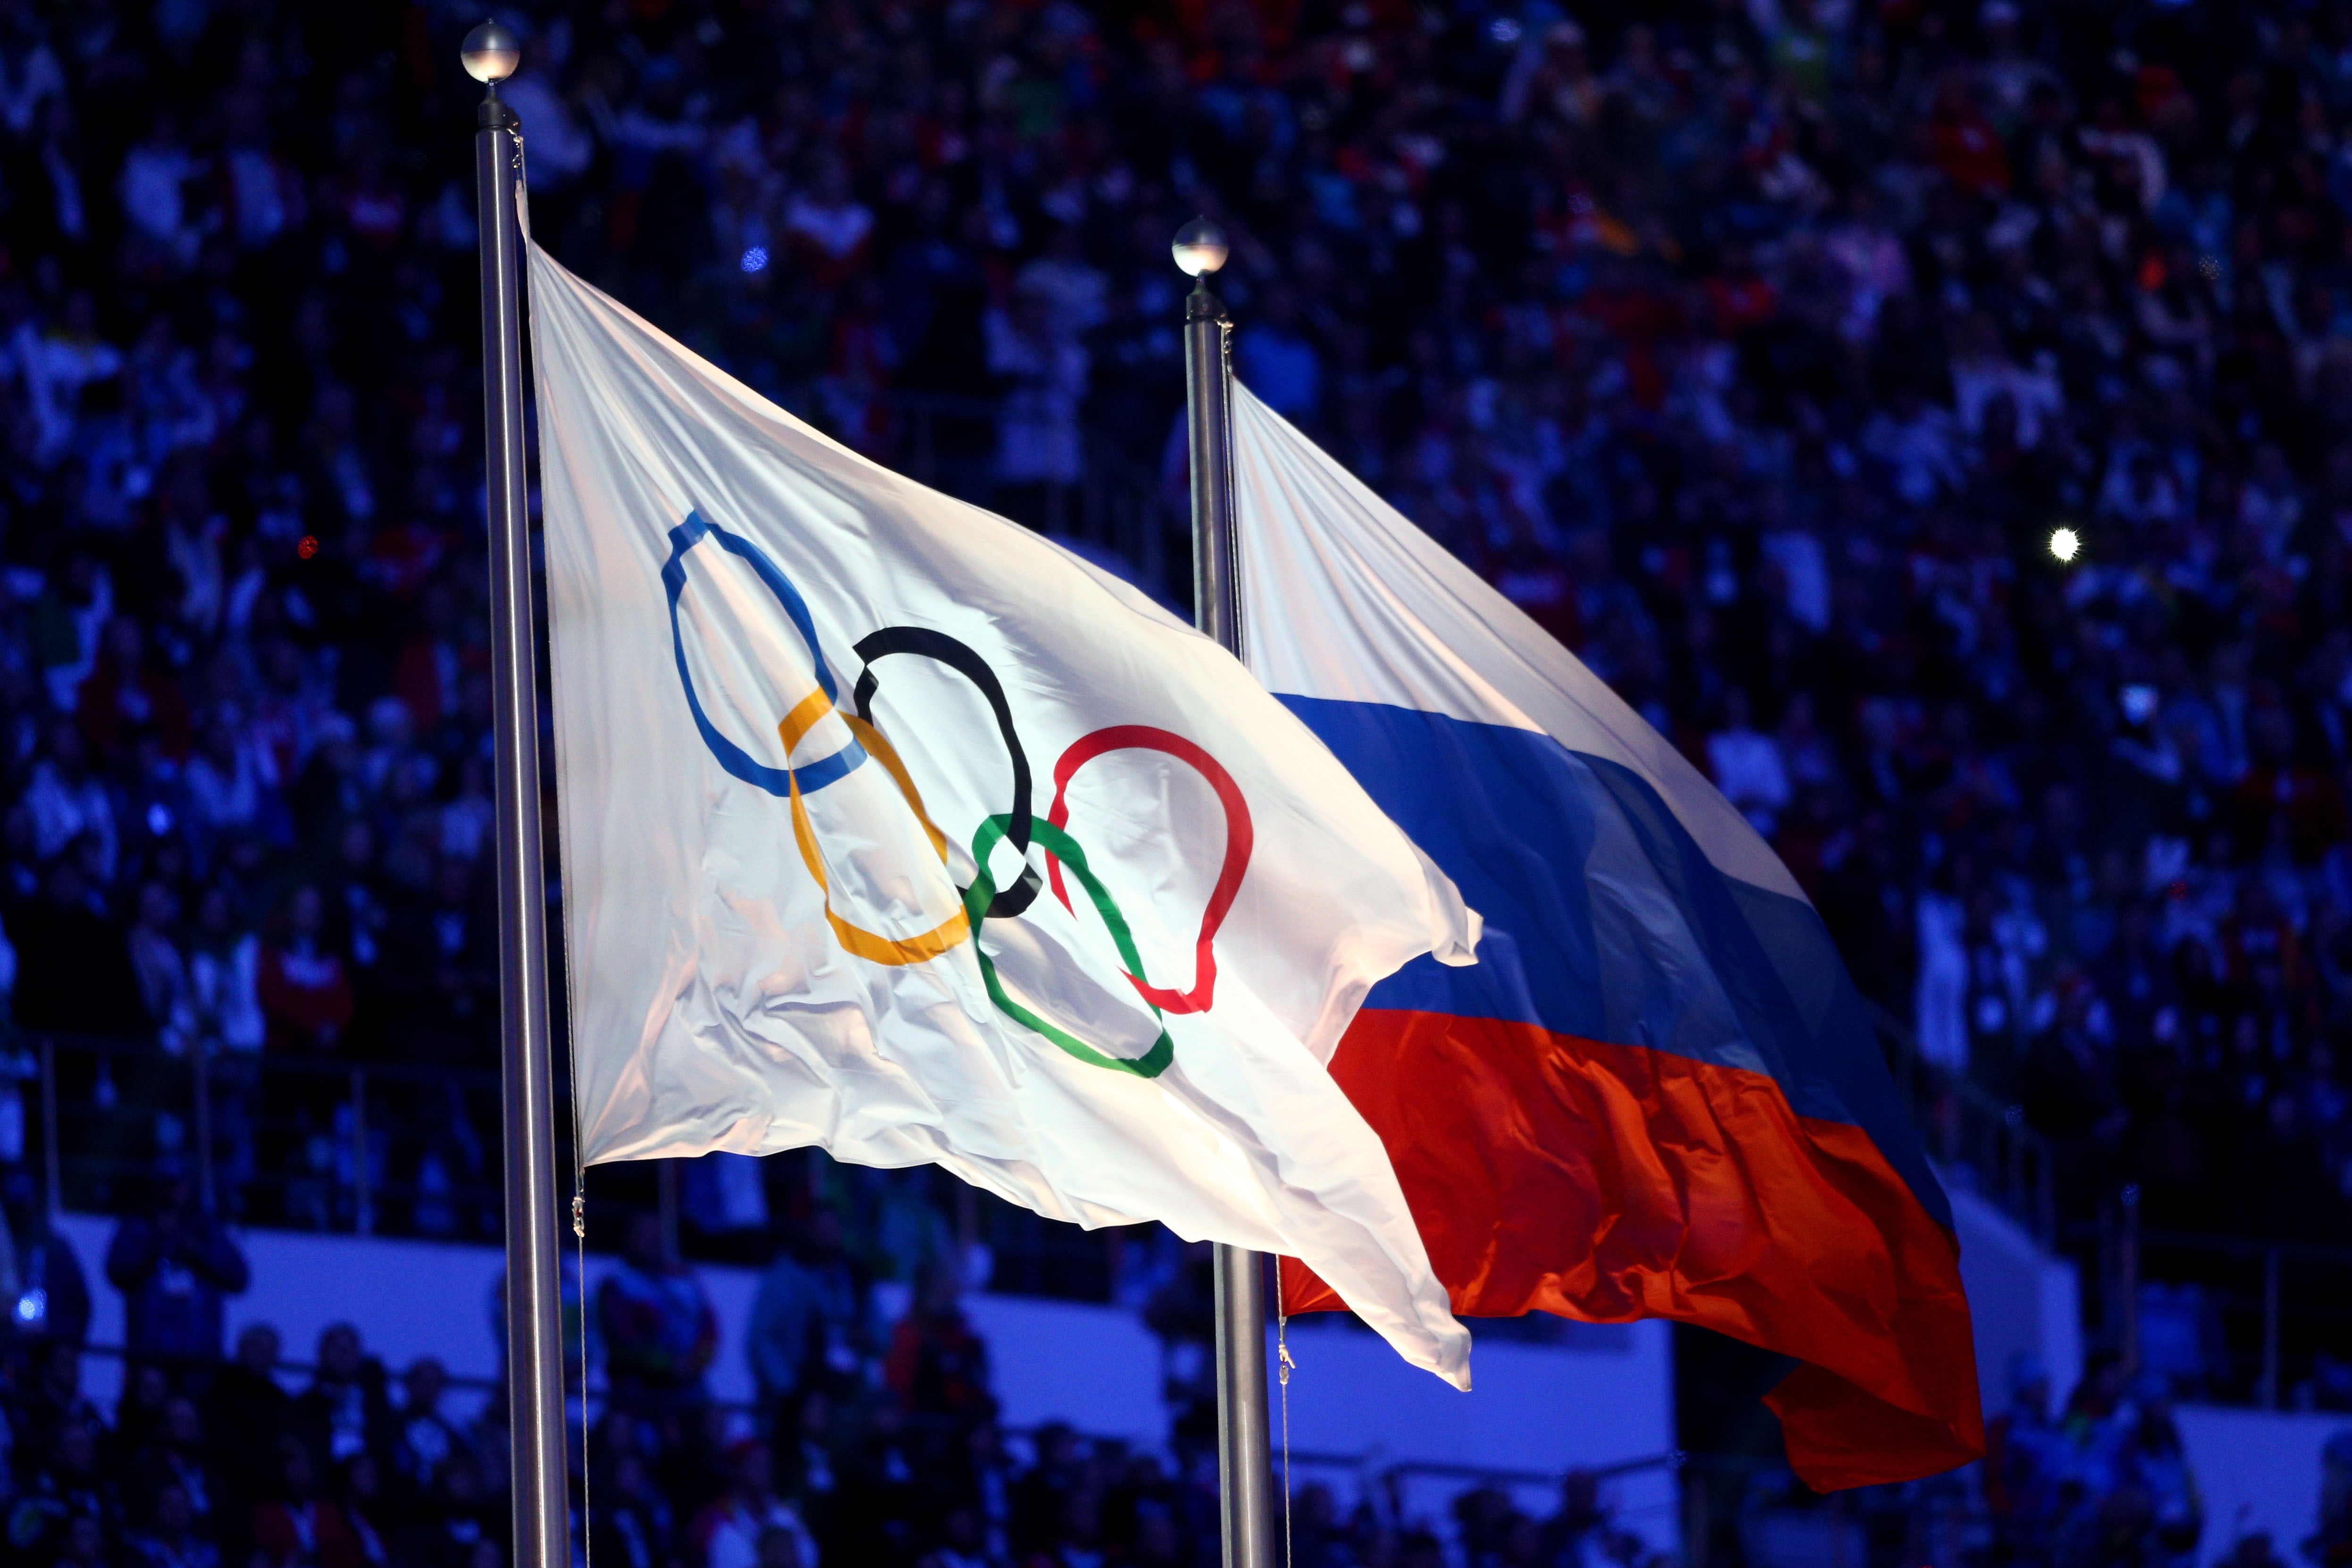 The Olympic flag and Russian flag are raised at the 2014 Sochi Winter Olympics